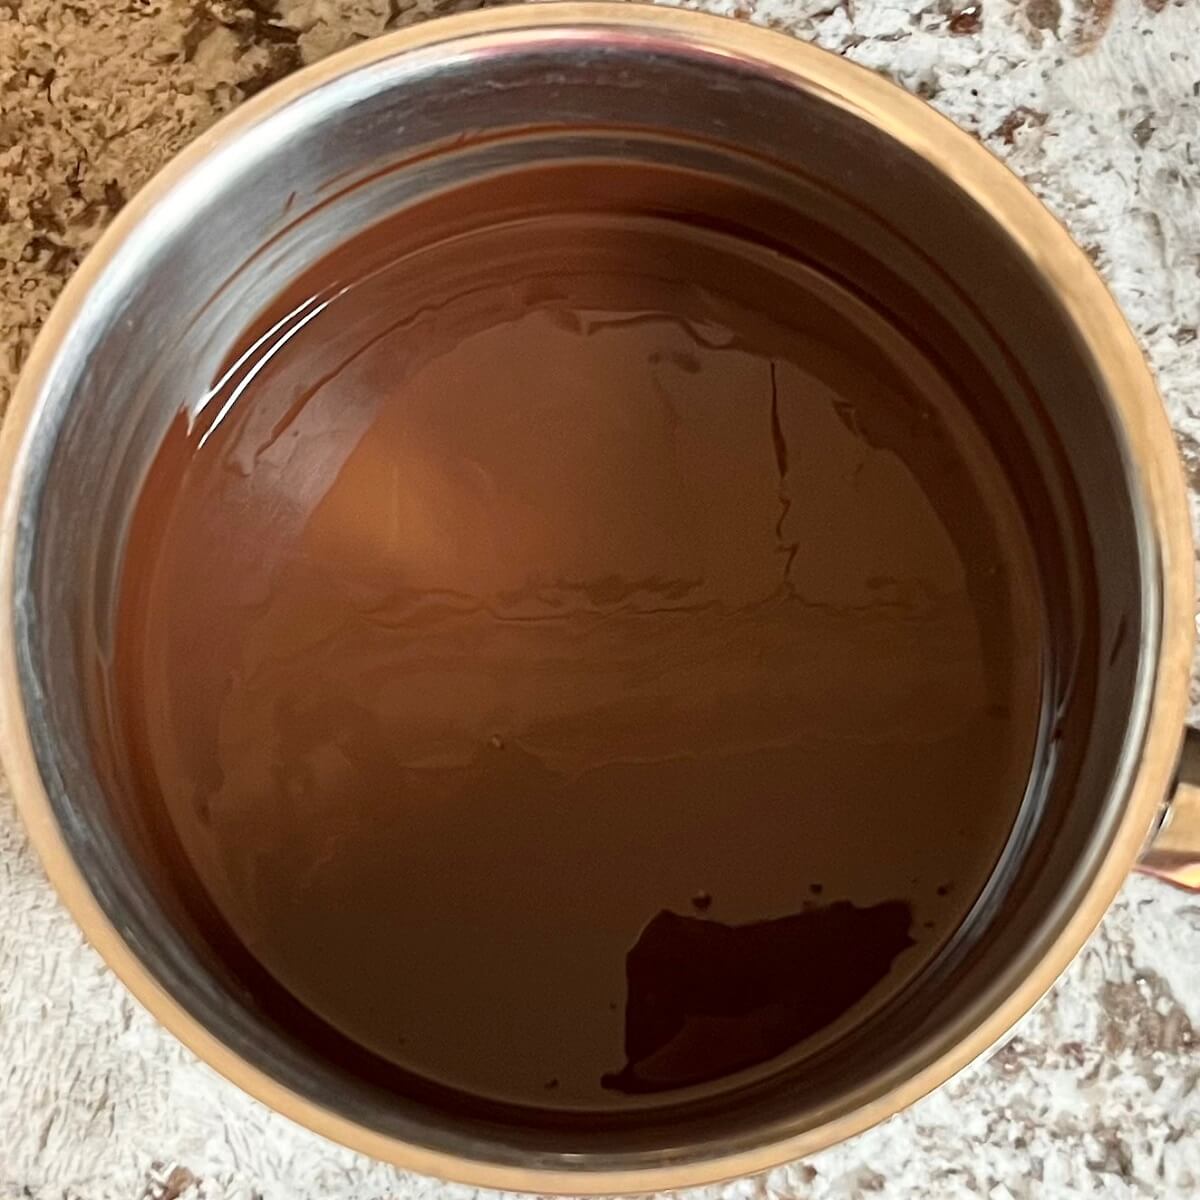 Dark chocolate melted in a steel pot.